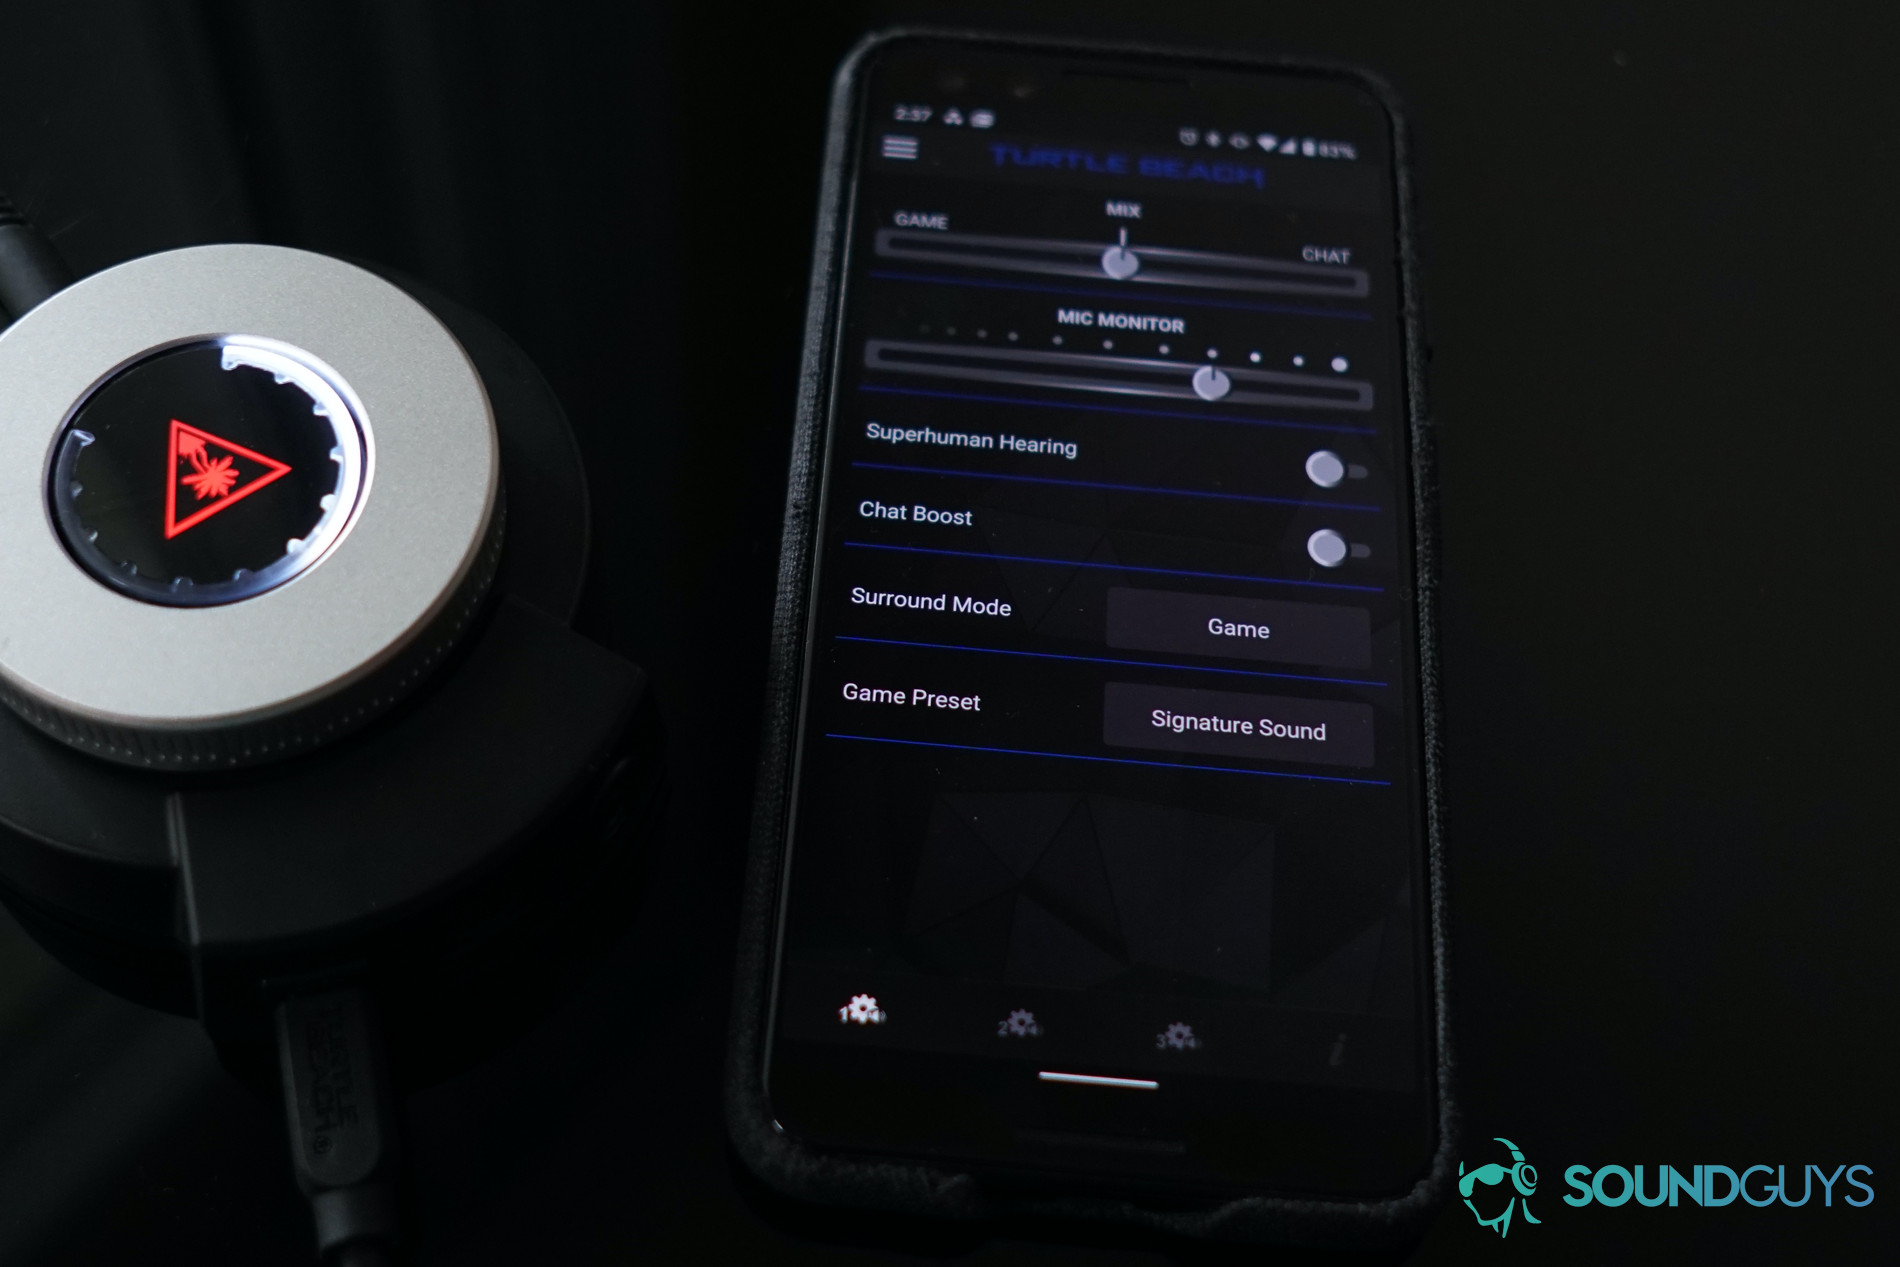 The Turtle Beach Elite Pro 2 gaming headset SuperAmp sits next to a Google Pixel 3 running the Turtle Beach Android app.